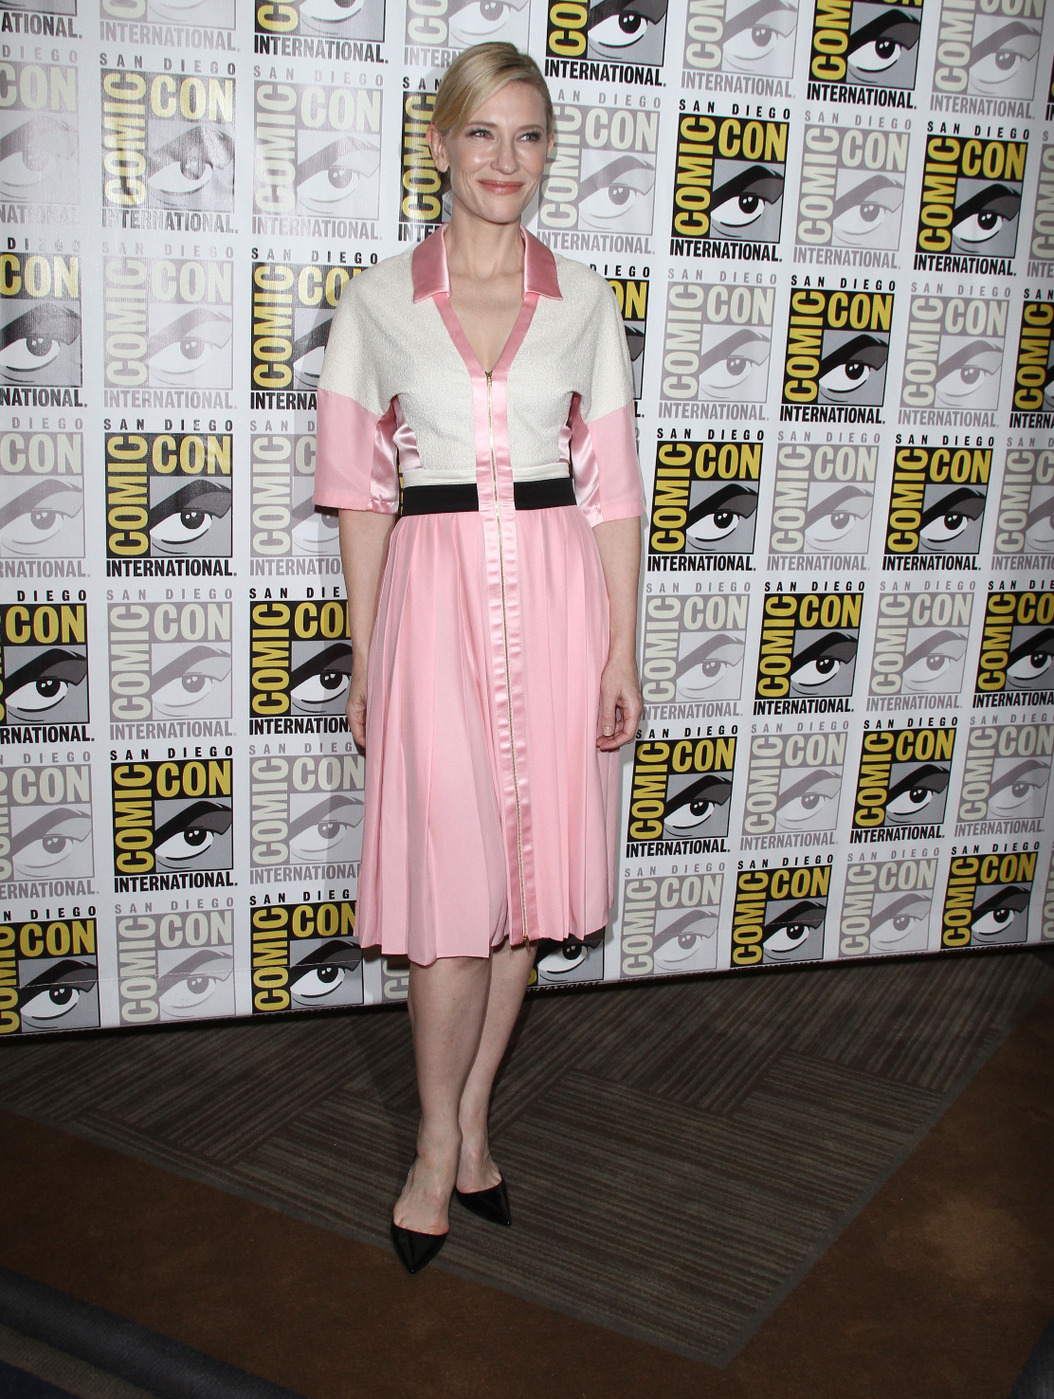 Fug or Fab: Cate Blanchett in Fausto Puglisi at Comic-Con